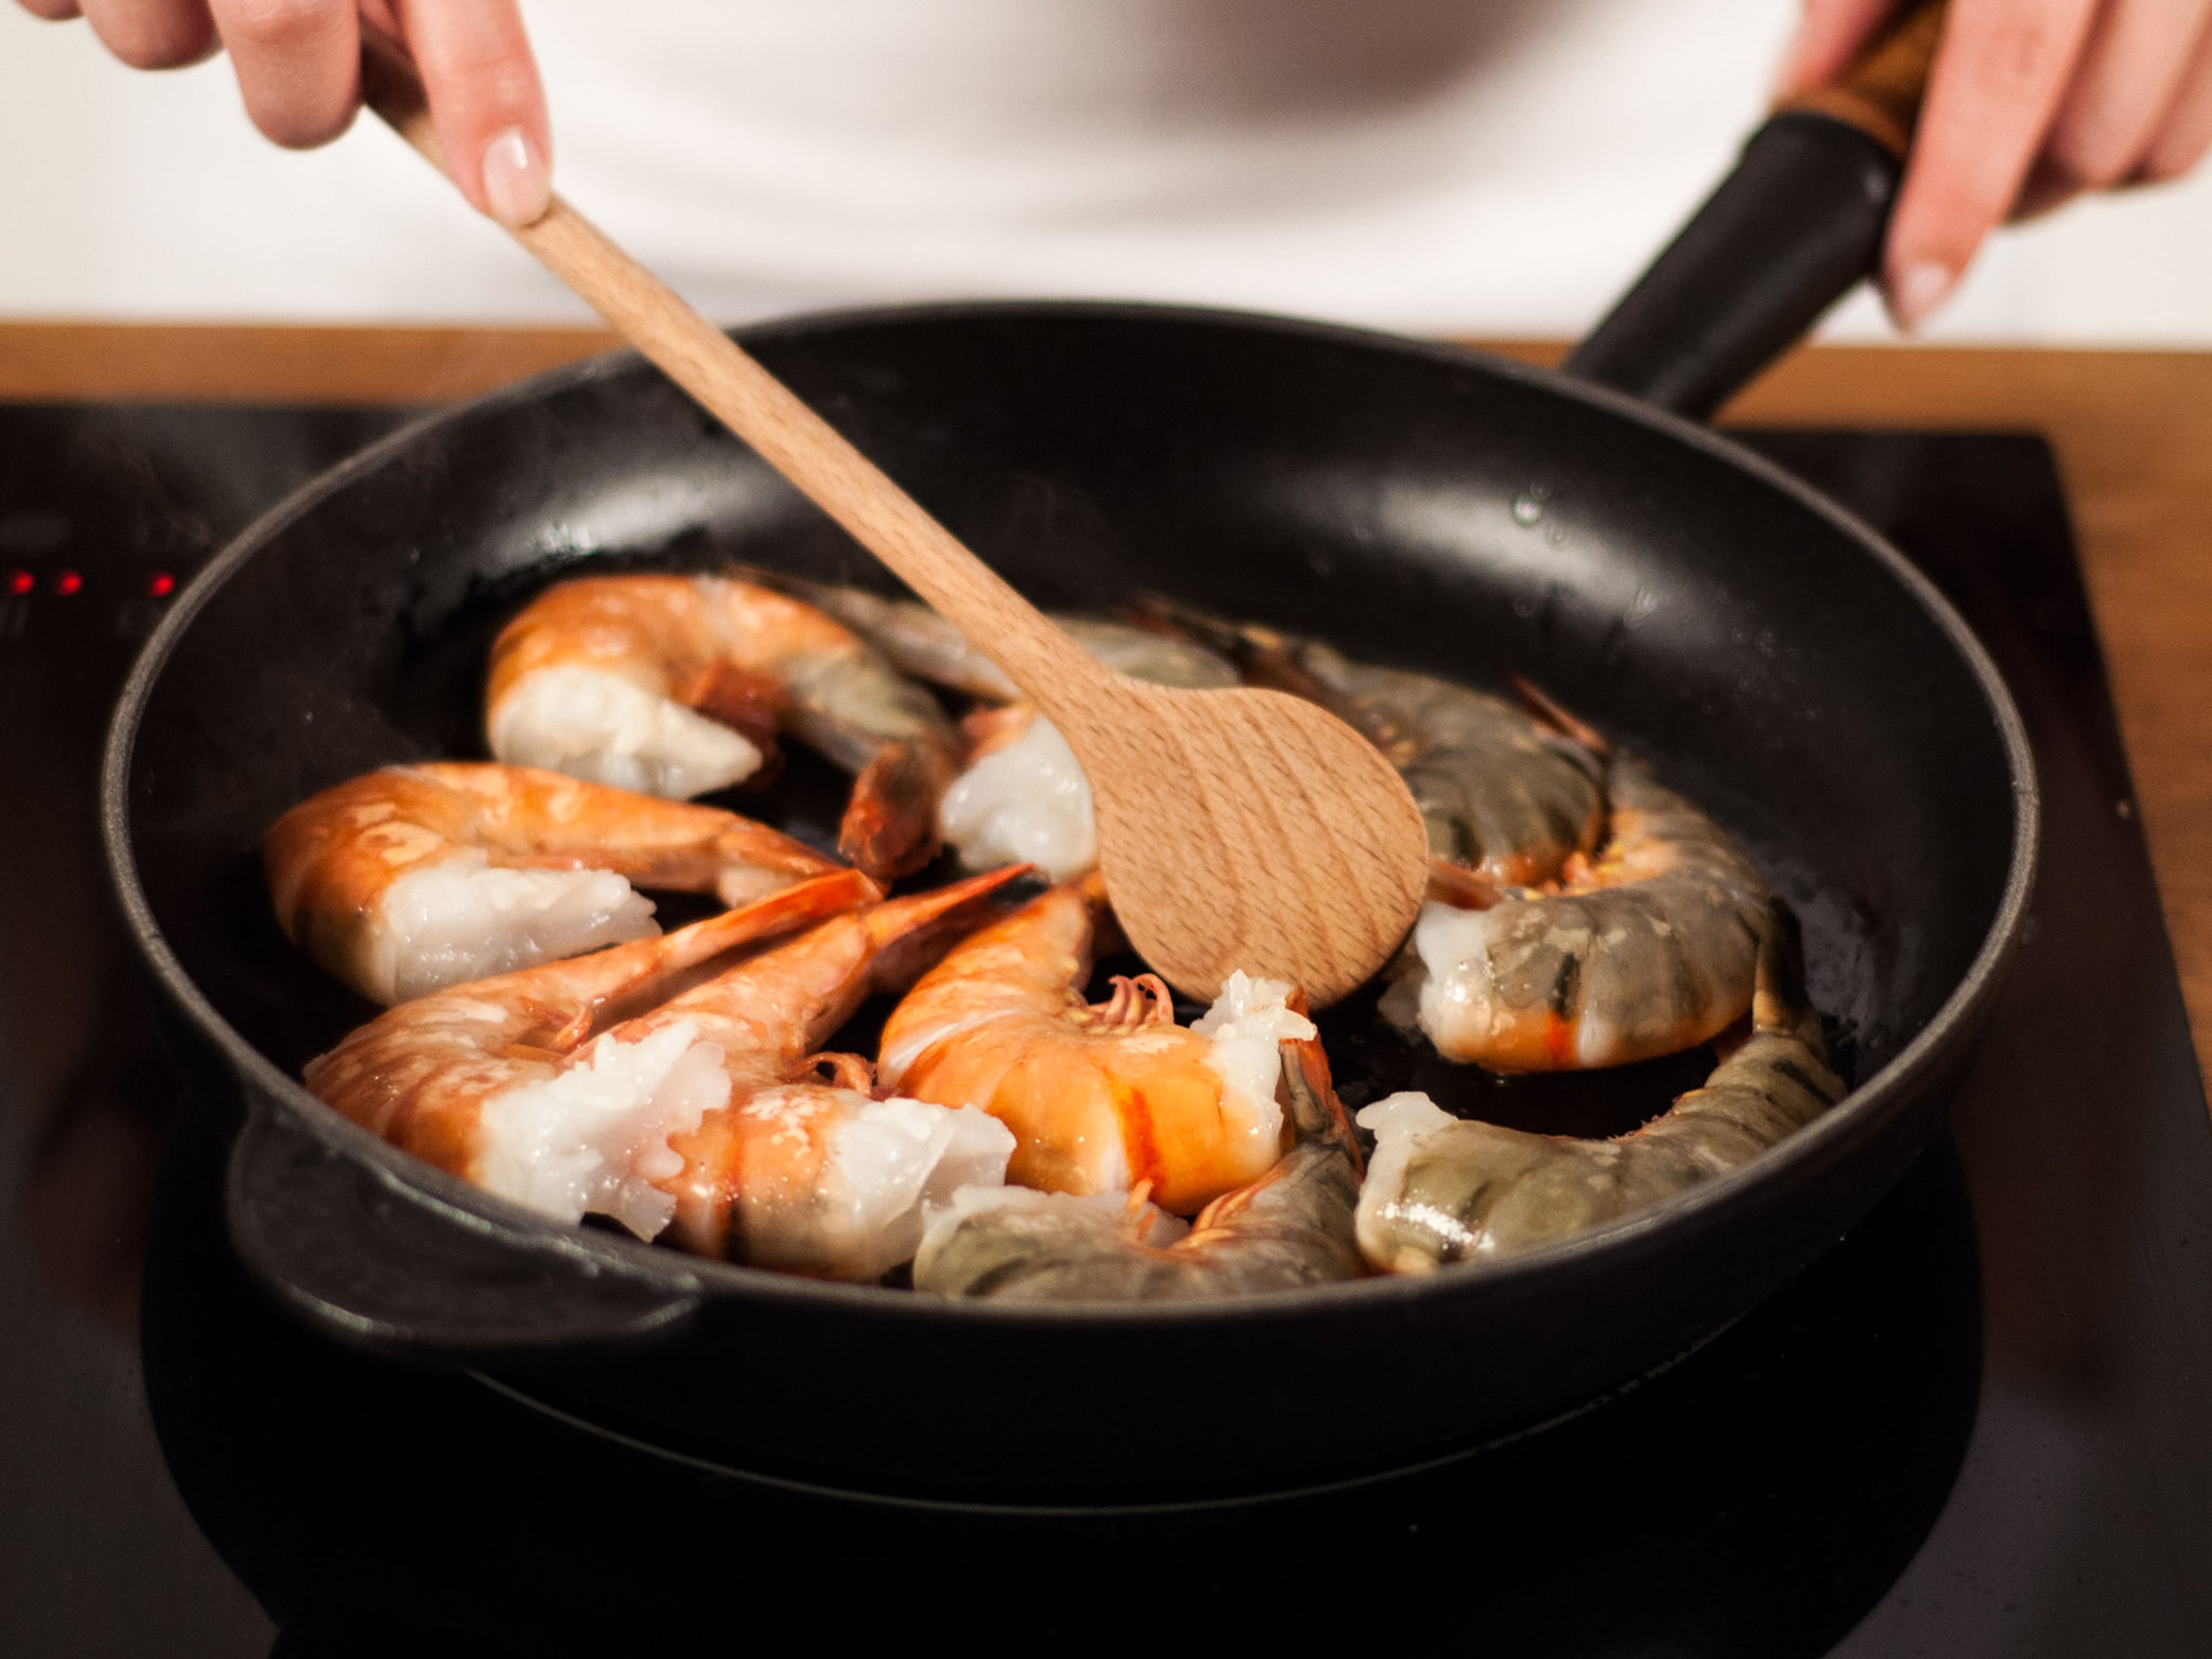 Heat some vegetable oil in a frying pan over medium heat. Add shrimp and sauté for approx. 1 min. on each side until red.